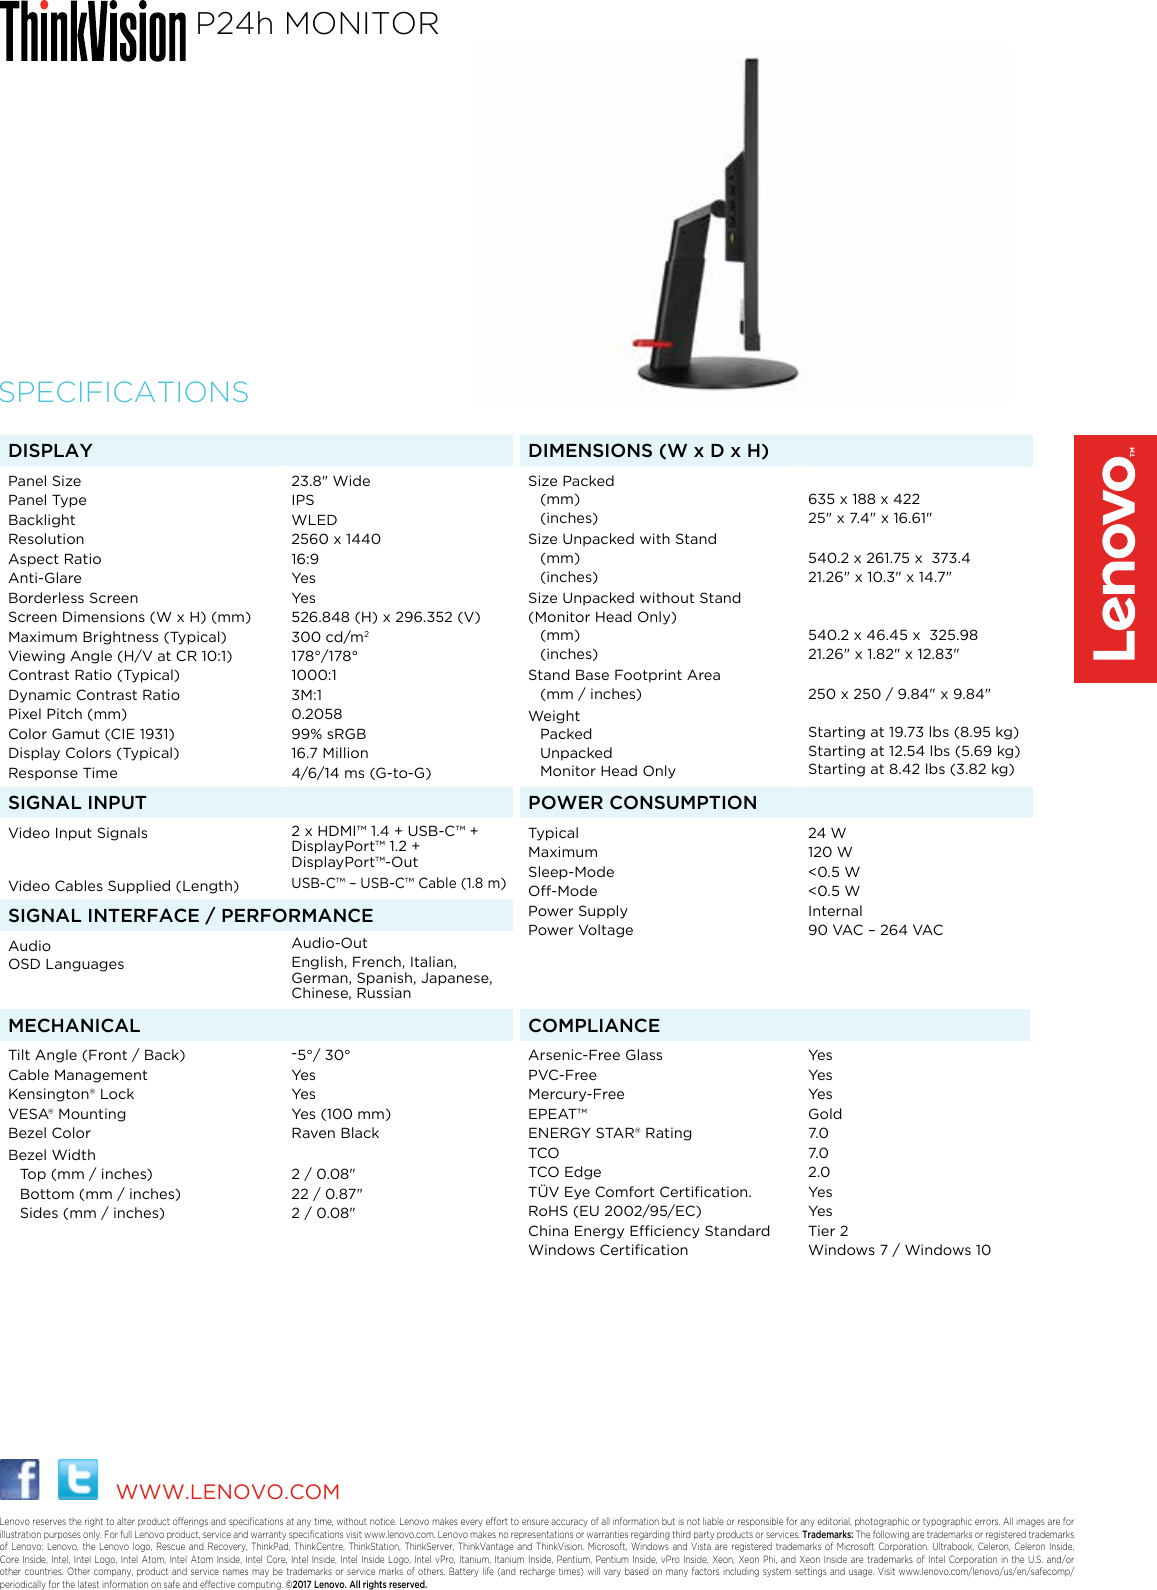 Page 2 of 2 - Lenovo P24H10 Overview ThinkVision P24h Monitor User Manual Think Vision P24h-10